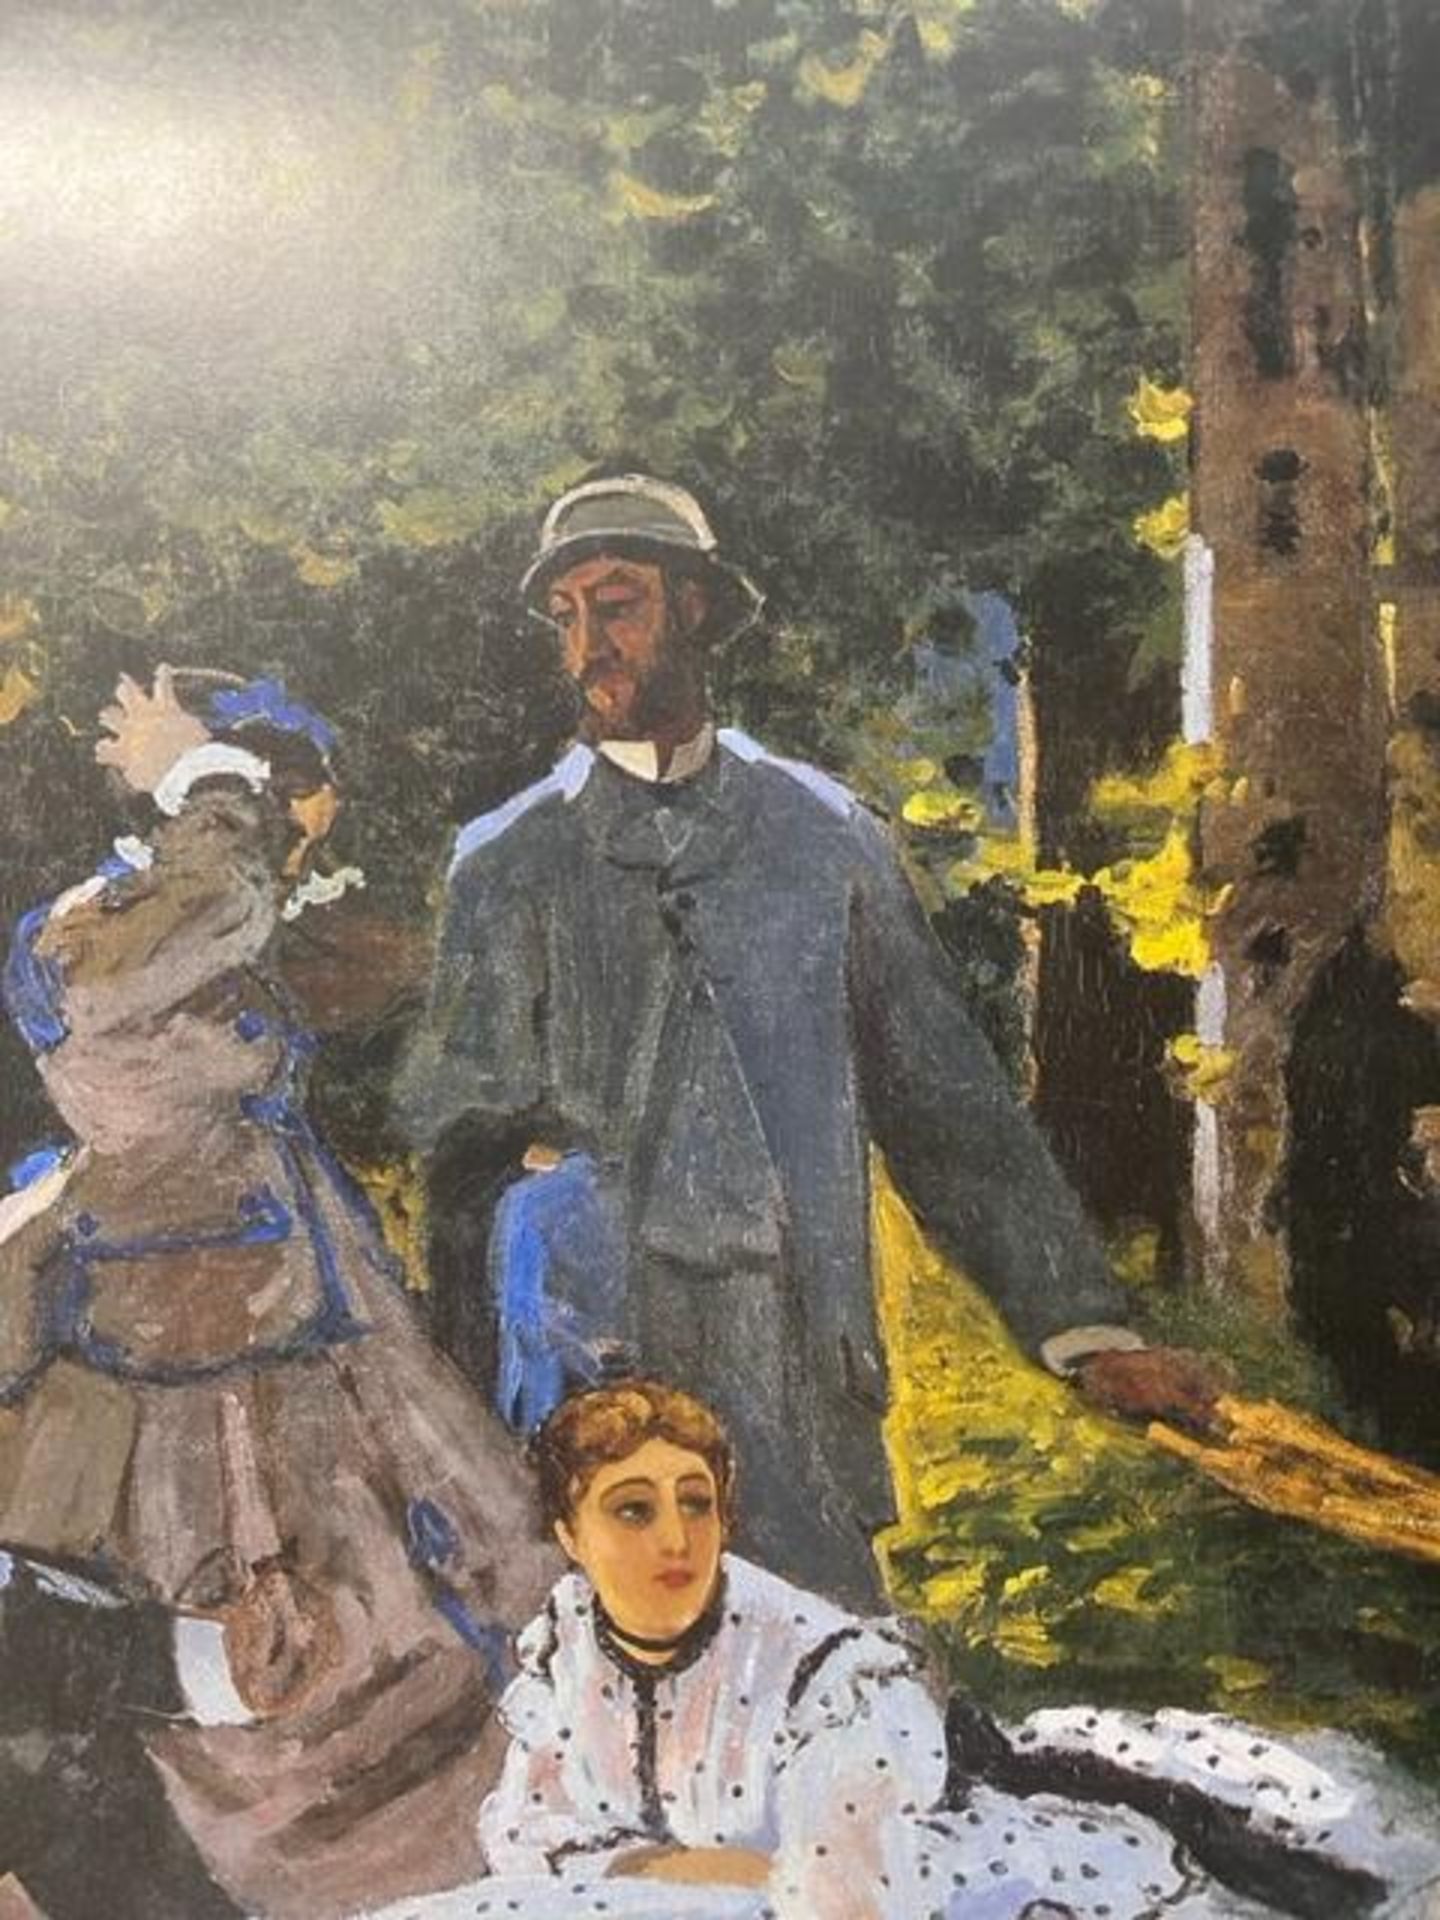 Claude Monet "Luncheon on the Grass" Print. - Image 2 of 6